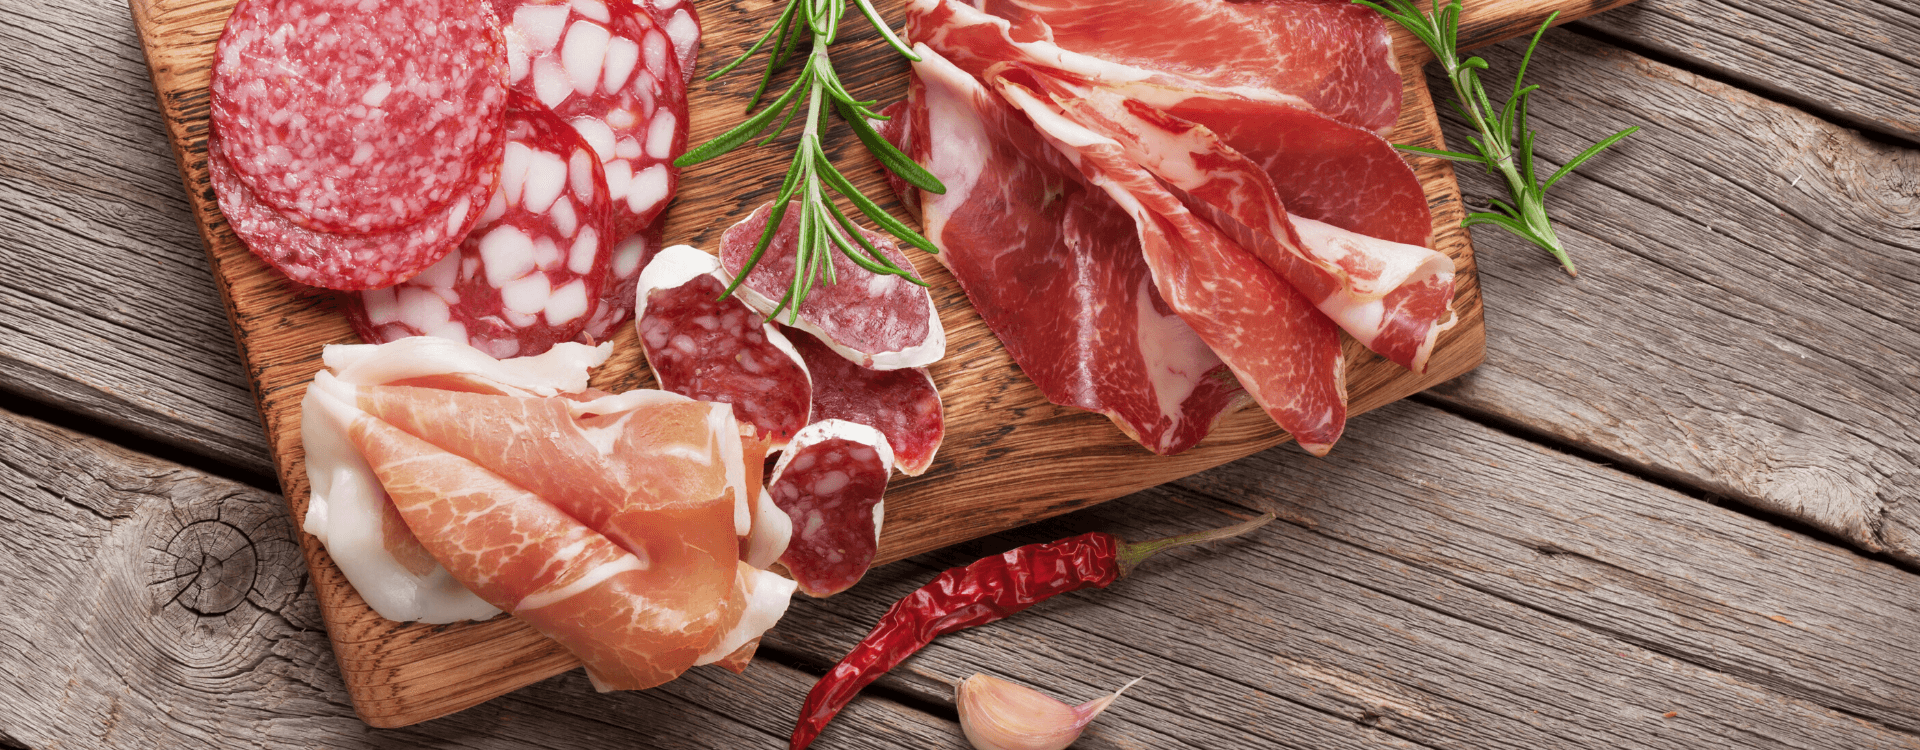 A JOURNEY THROUGH ITALY’S COLD CUTS